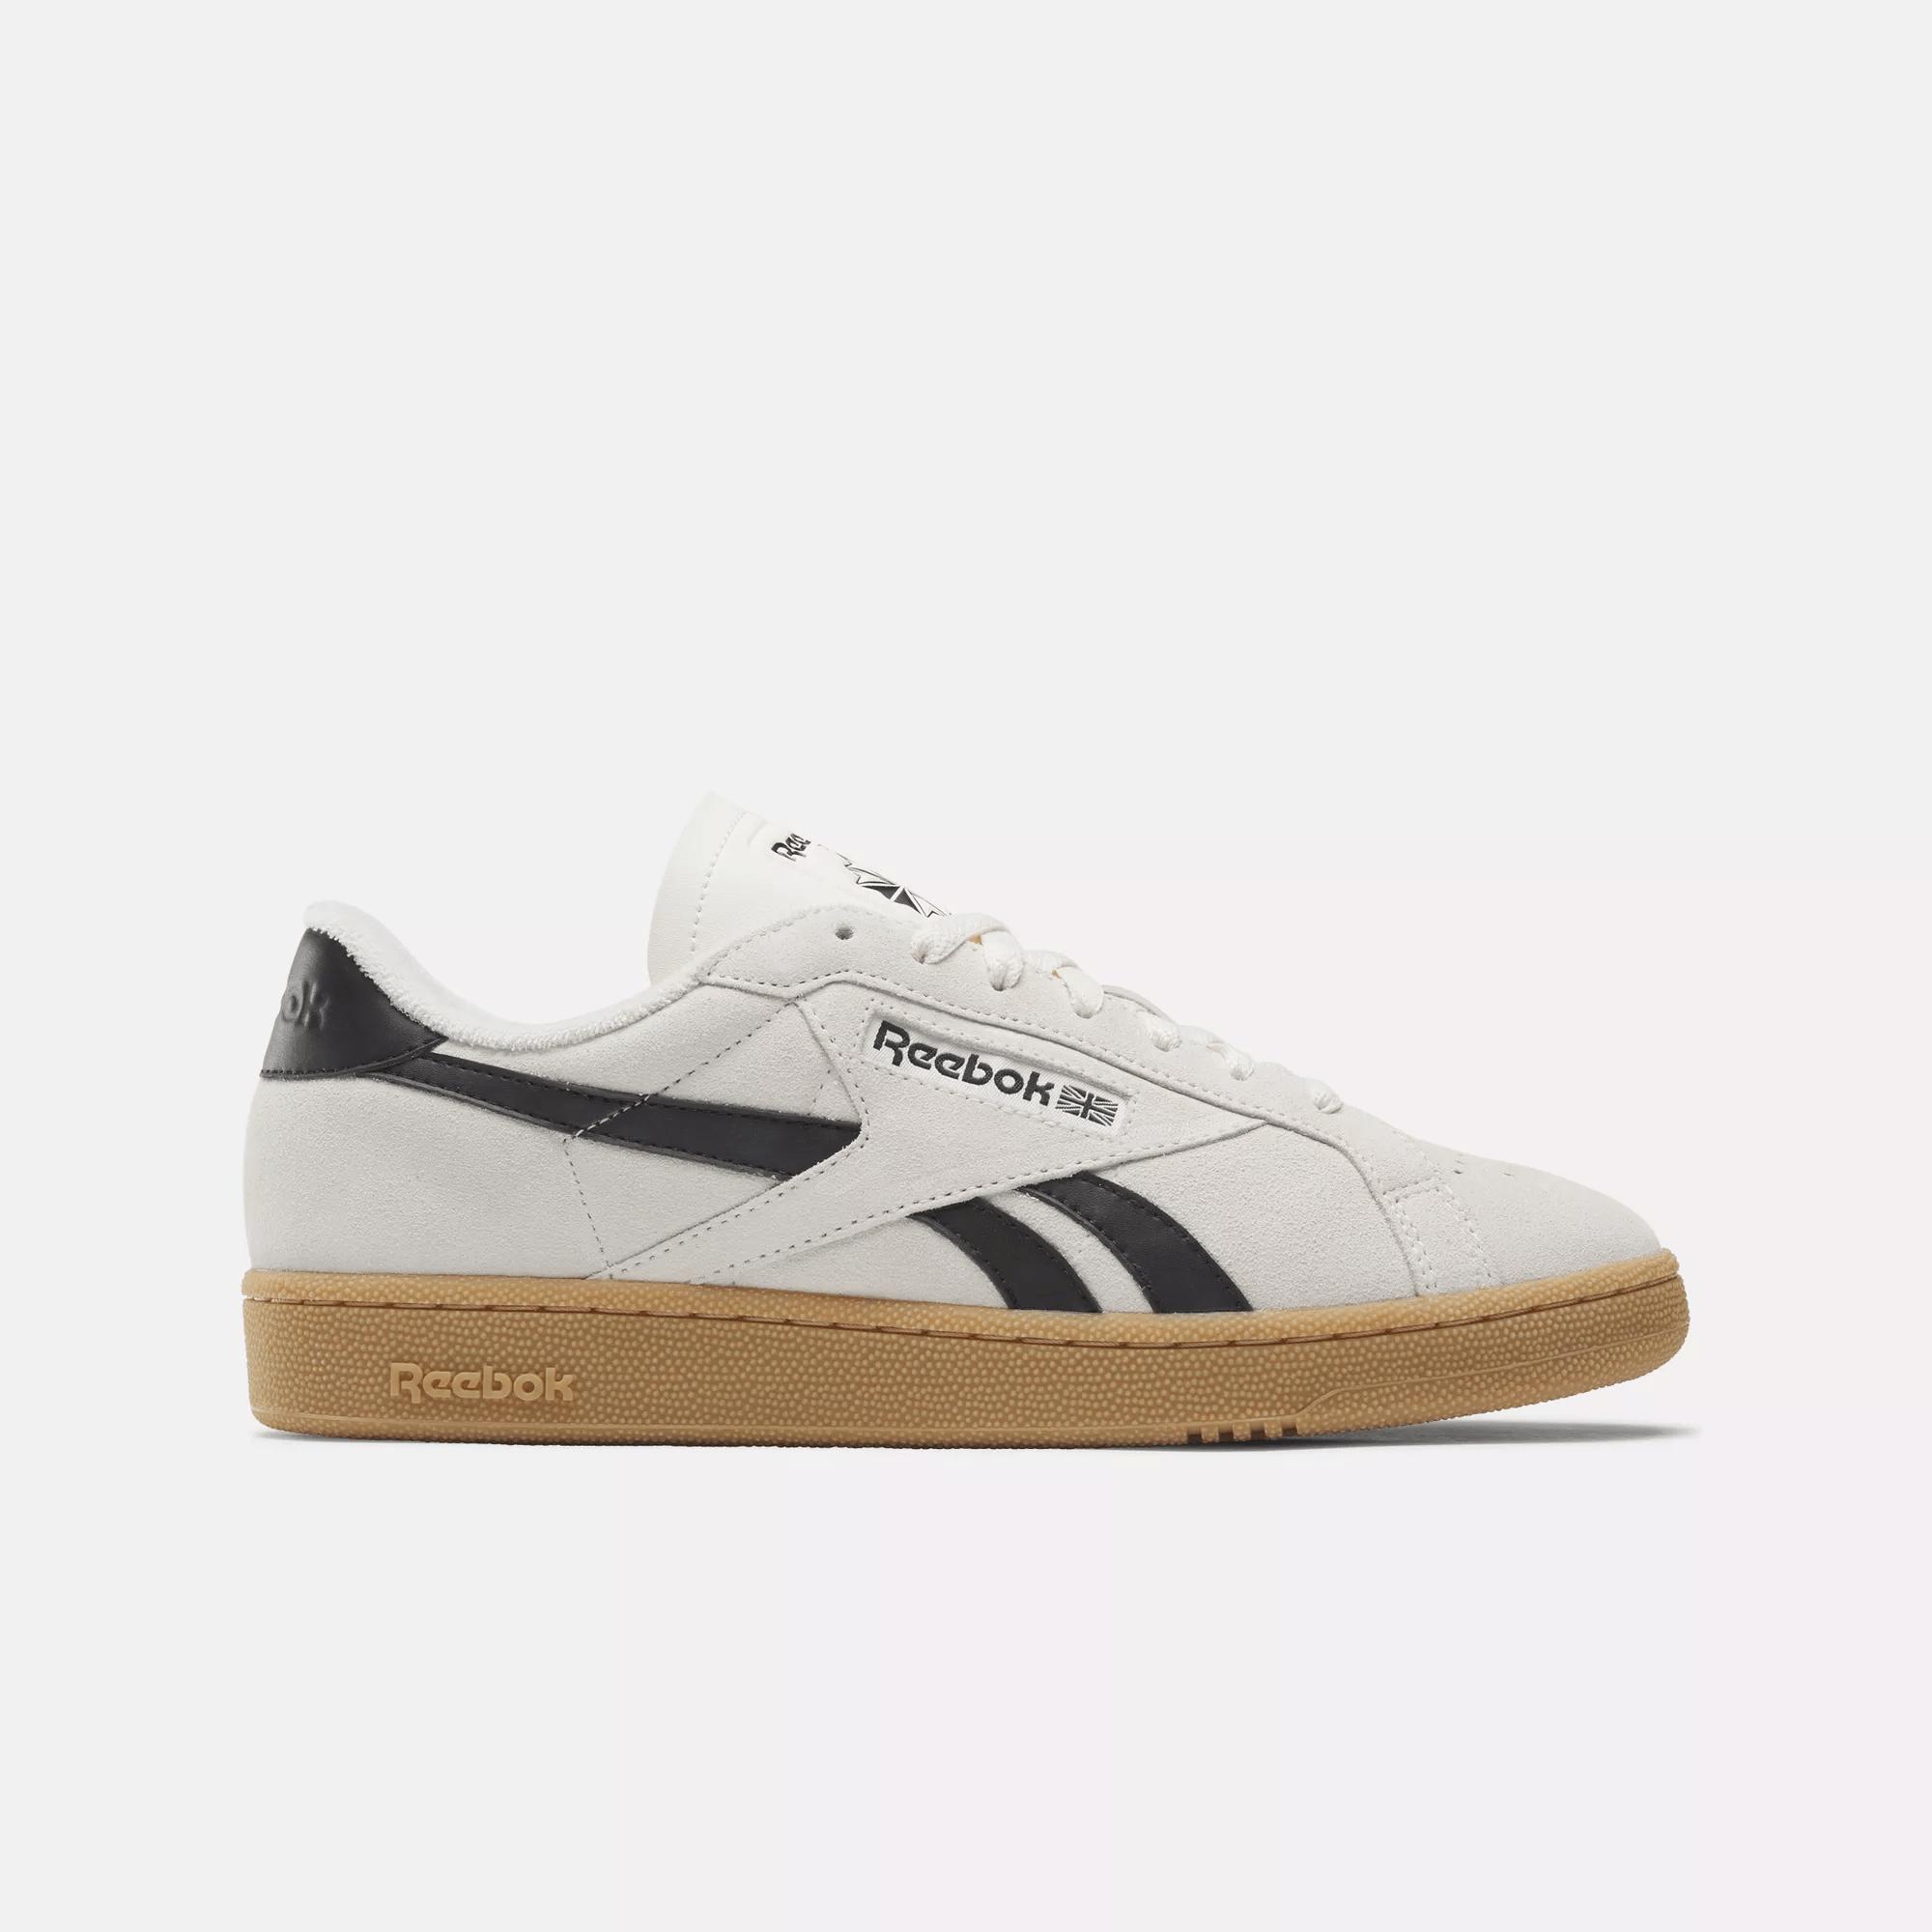 Reebok Club C Grounds Uk Shoes in White | Lyst